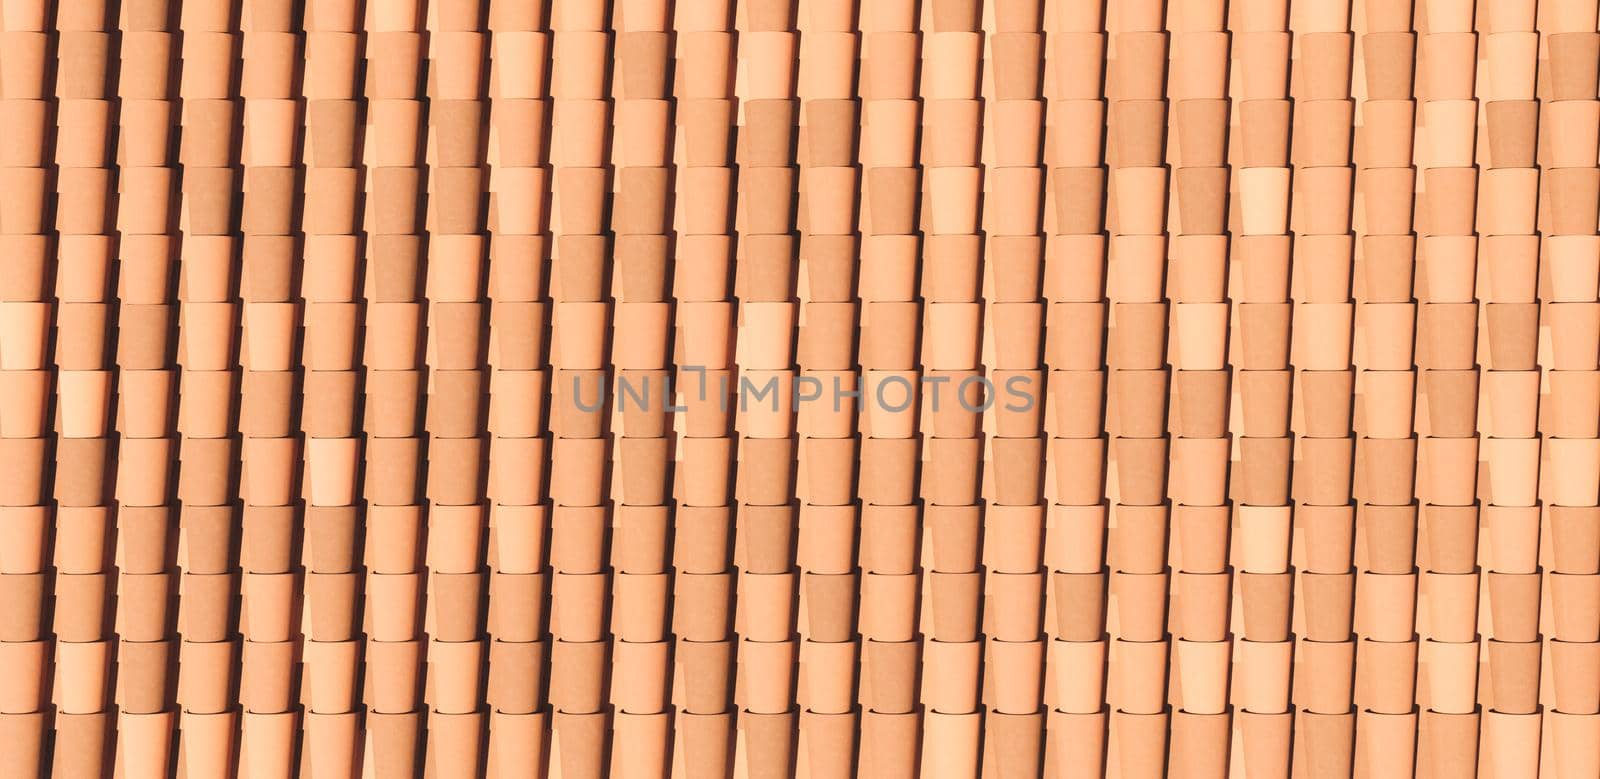 Tile roofs pattern by asolano